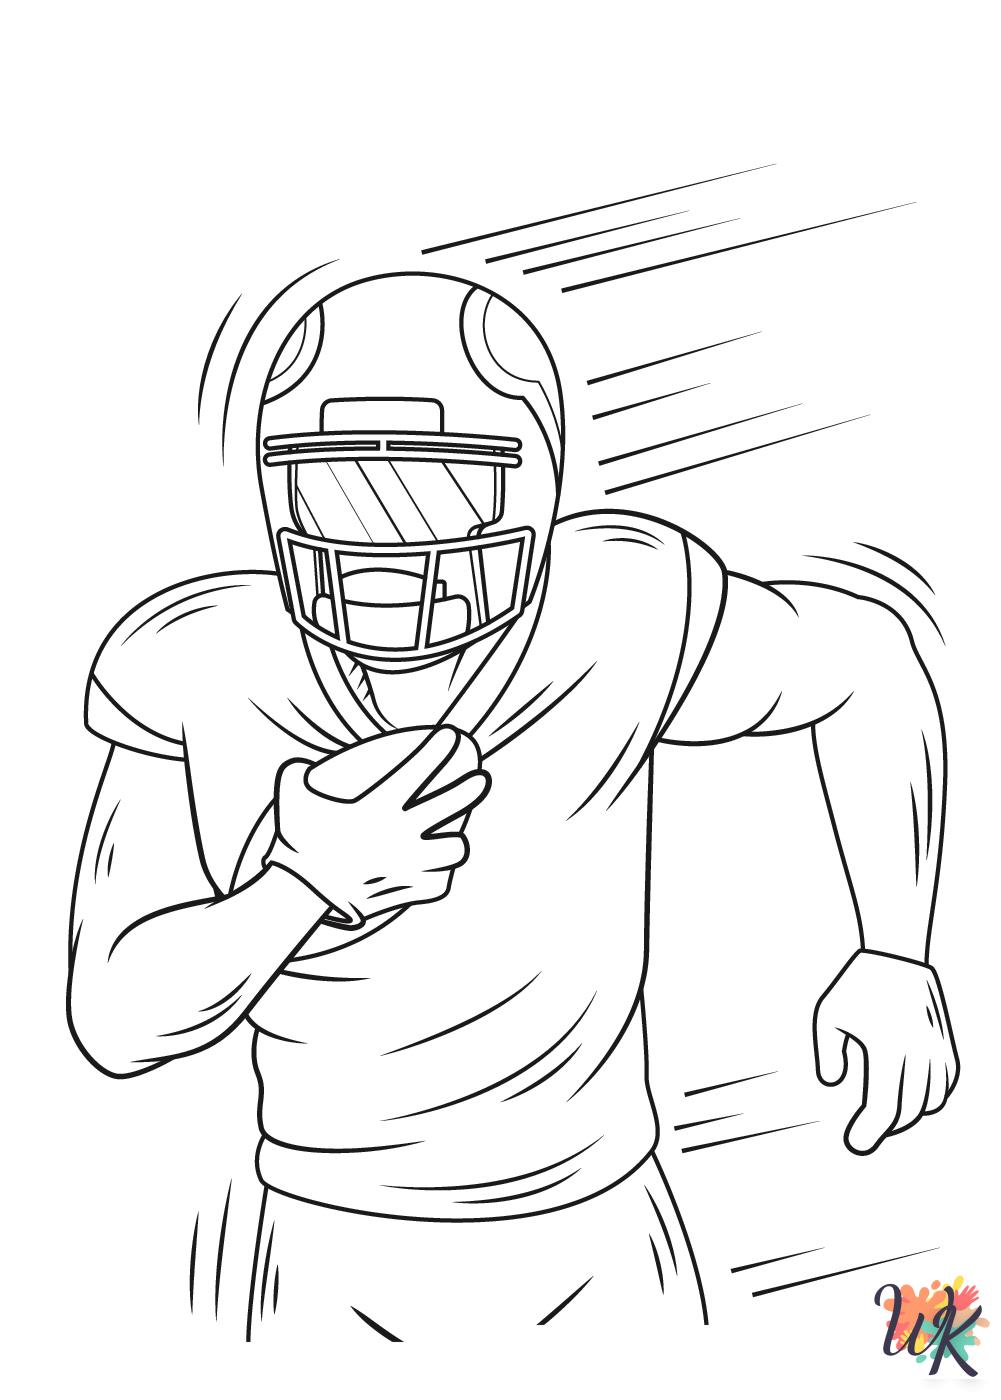 NFL free coloring pages